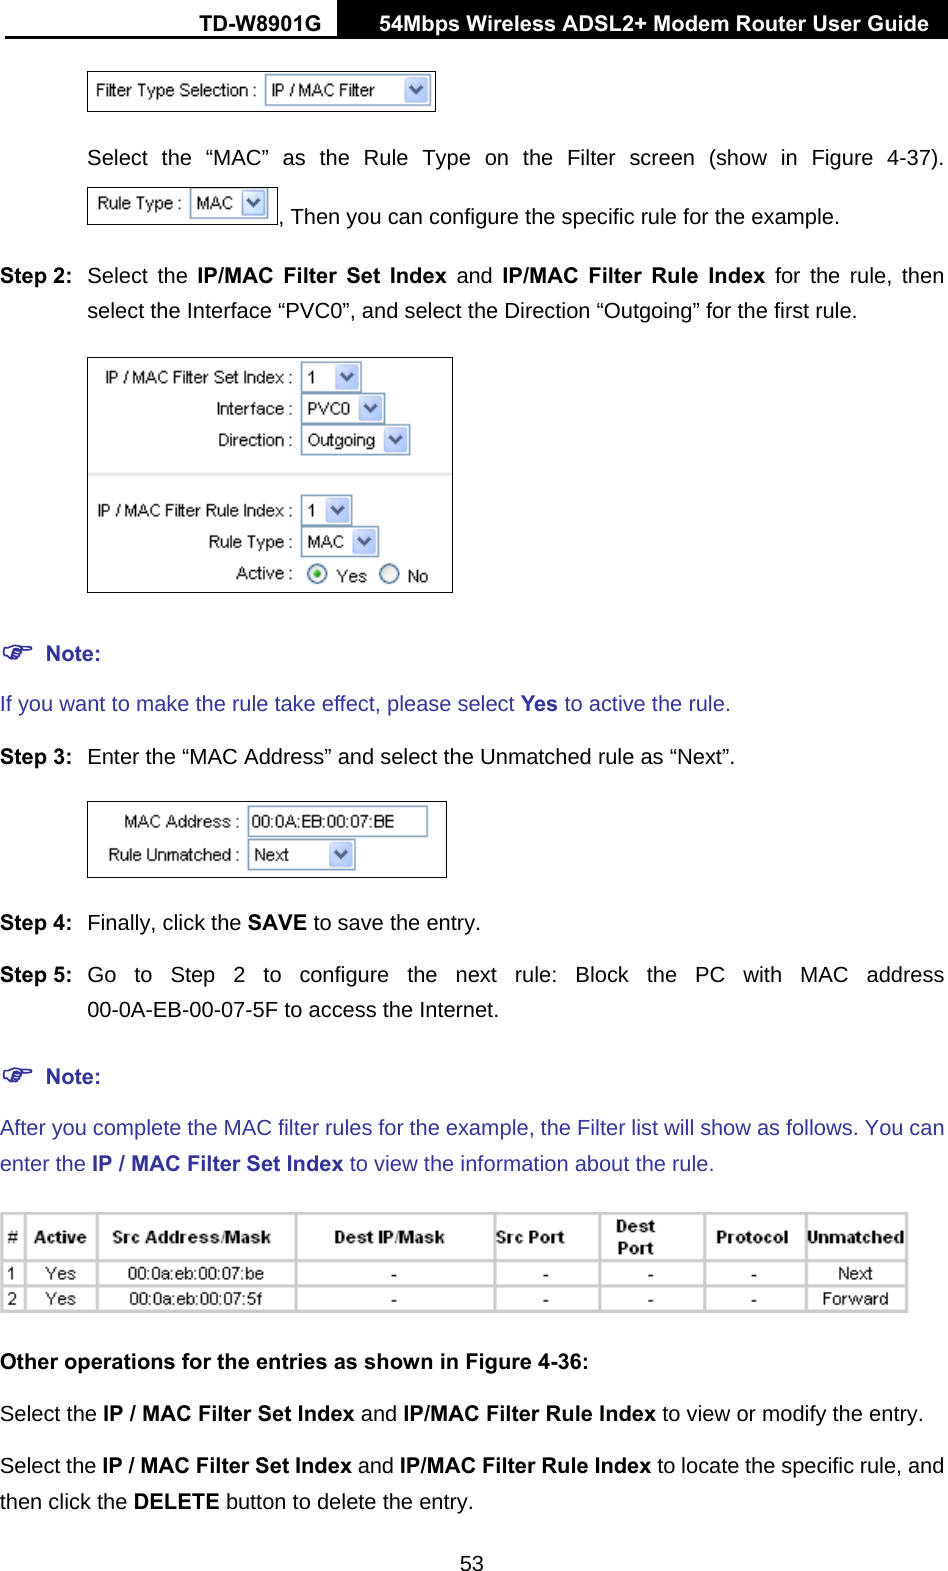 TD-W8901G   54Mbps Wireless ADSL2+ Modem Router User Guide 53  Select the “MAC” as the Rule Type on the Filter screen (show in Figure 4-37). , Then you can configure the specific rule for the example. Step 2:  Select the IP/MAC Filter Set Index and IP/MAC Filter Rule Index for the rule, then select the Interface “PVC0”, and select the Direction “Outgoing” for the first rule.  ) Note: If you want to make the rule take effect, please select Yes to active the rule. Step 3:  Enter the “MAC Address” and select the Unmatched rule as “Next”.  Step 4:  Finally, click the SAVE to save the entry. Step 5:  Go to Step 2 to configure the next rule: Block the PC with MAC address 00-0A-EB-00-07-5F to access the Internet. ) Note: After you complete the MAC filter rules for the example, the Filter list will show as follows. You can enter the IP / MAC Filter Set Index to view the information about the rule.  Other operations for the entries as shown in Figure 4-36: Select the IP / MAC Filter Set Index and IP/MAC Filter Rule Index to view or modify the entry. Select the IP / MAC Filter Set Index and IP/MAC Filter Rule Index to locate the specific rule, and then click the DELETE button to delete the entry. 